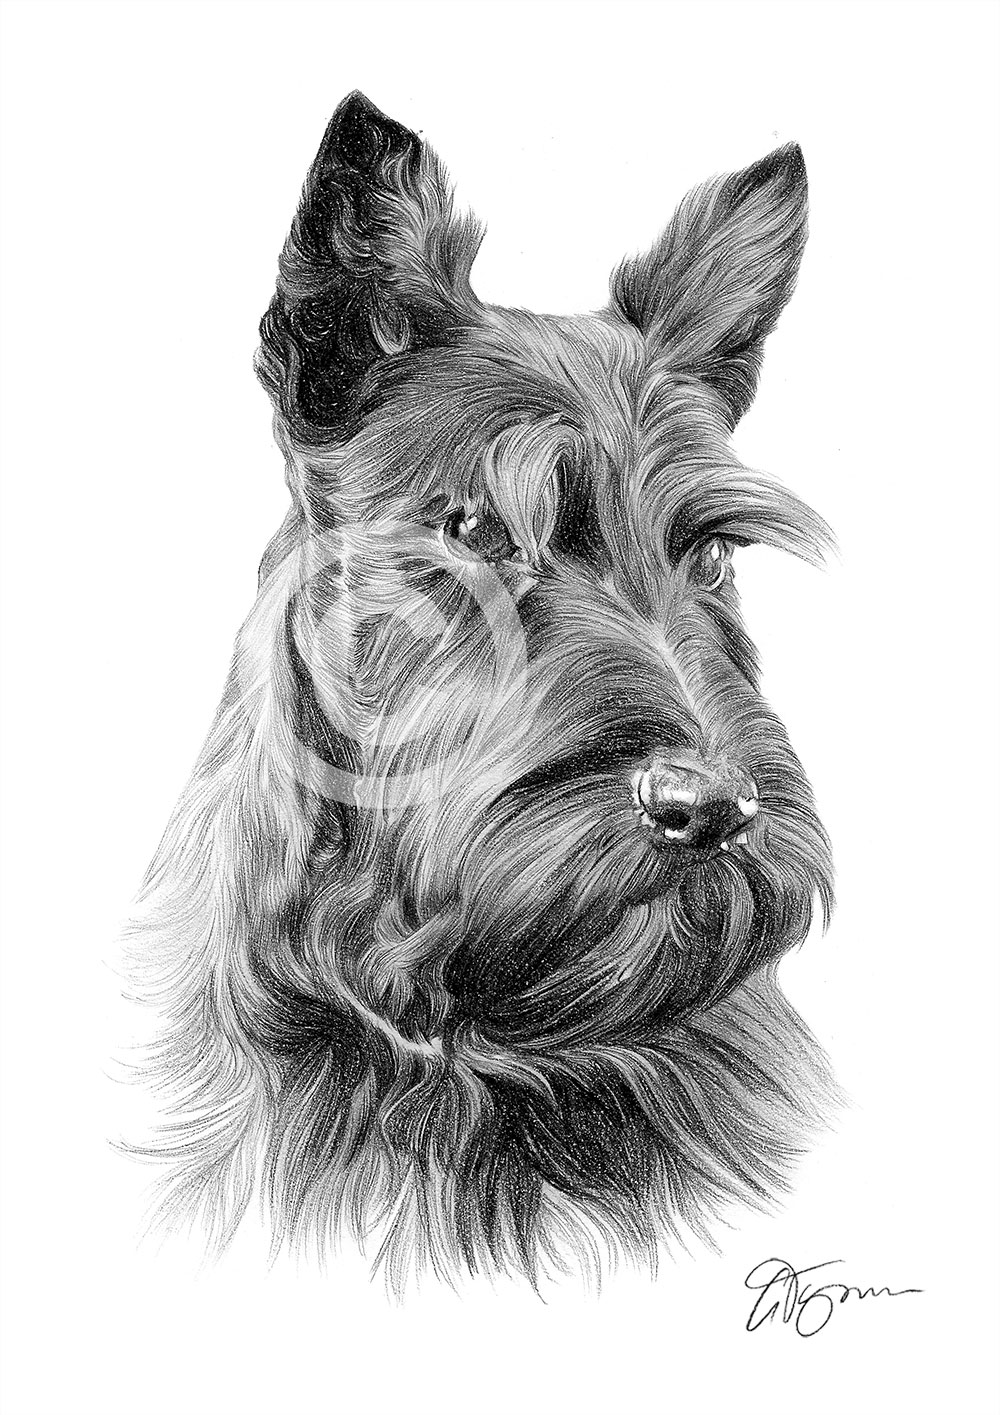 Pencil drawing of a Scottish terrier by artist Gary Tymon